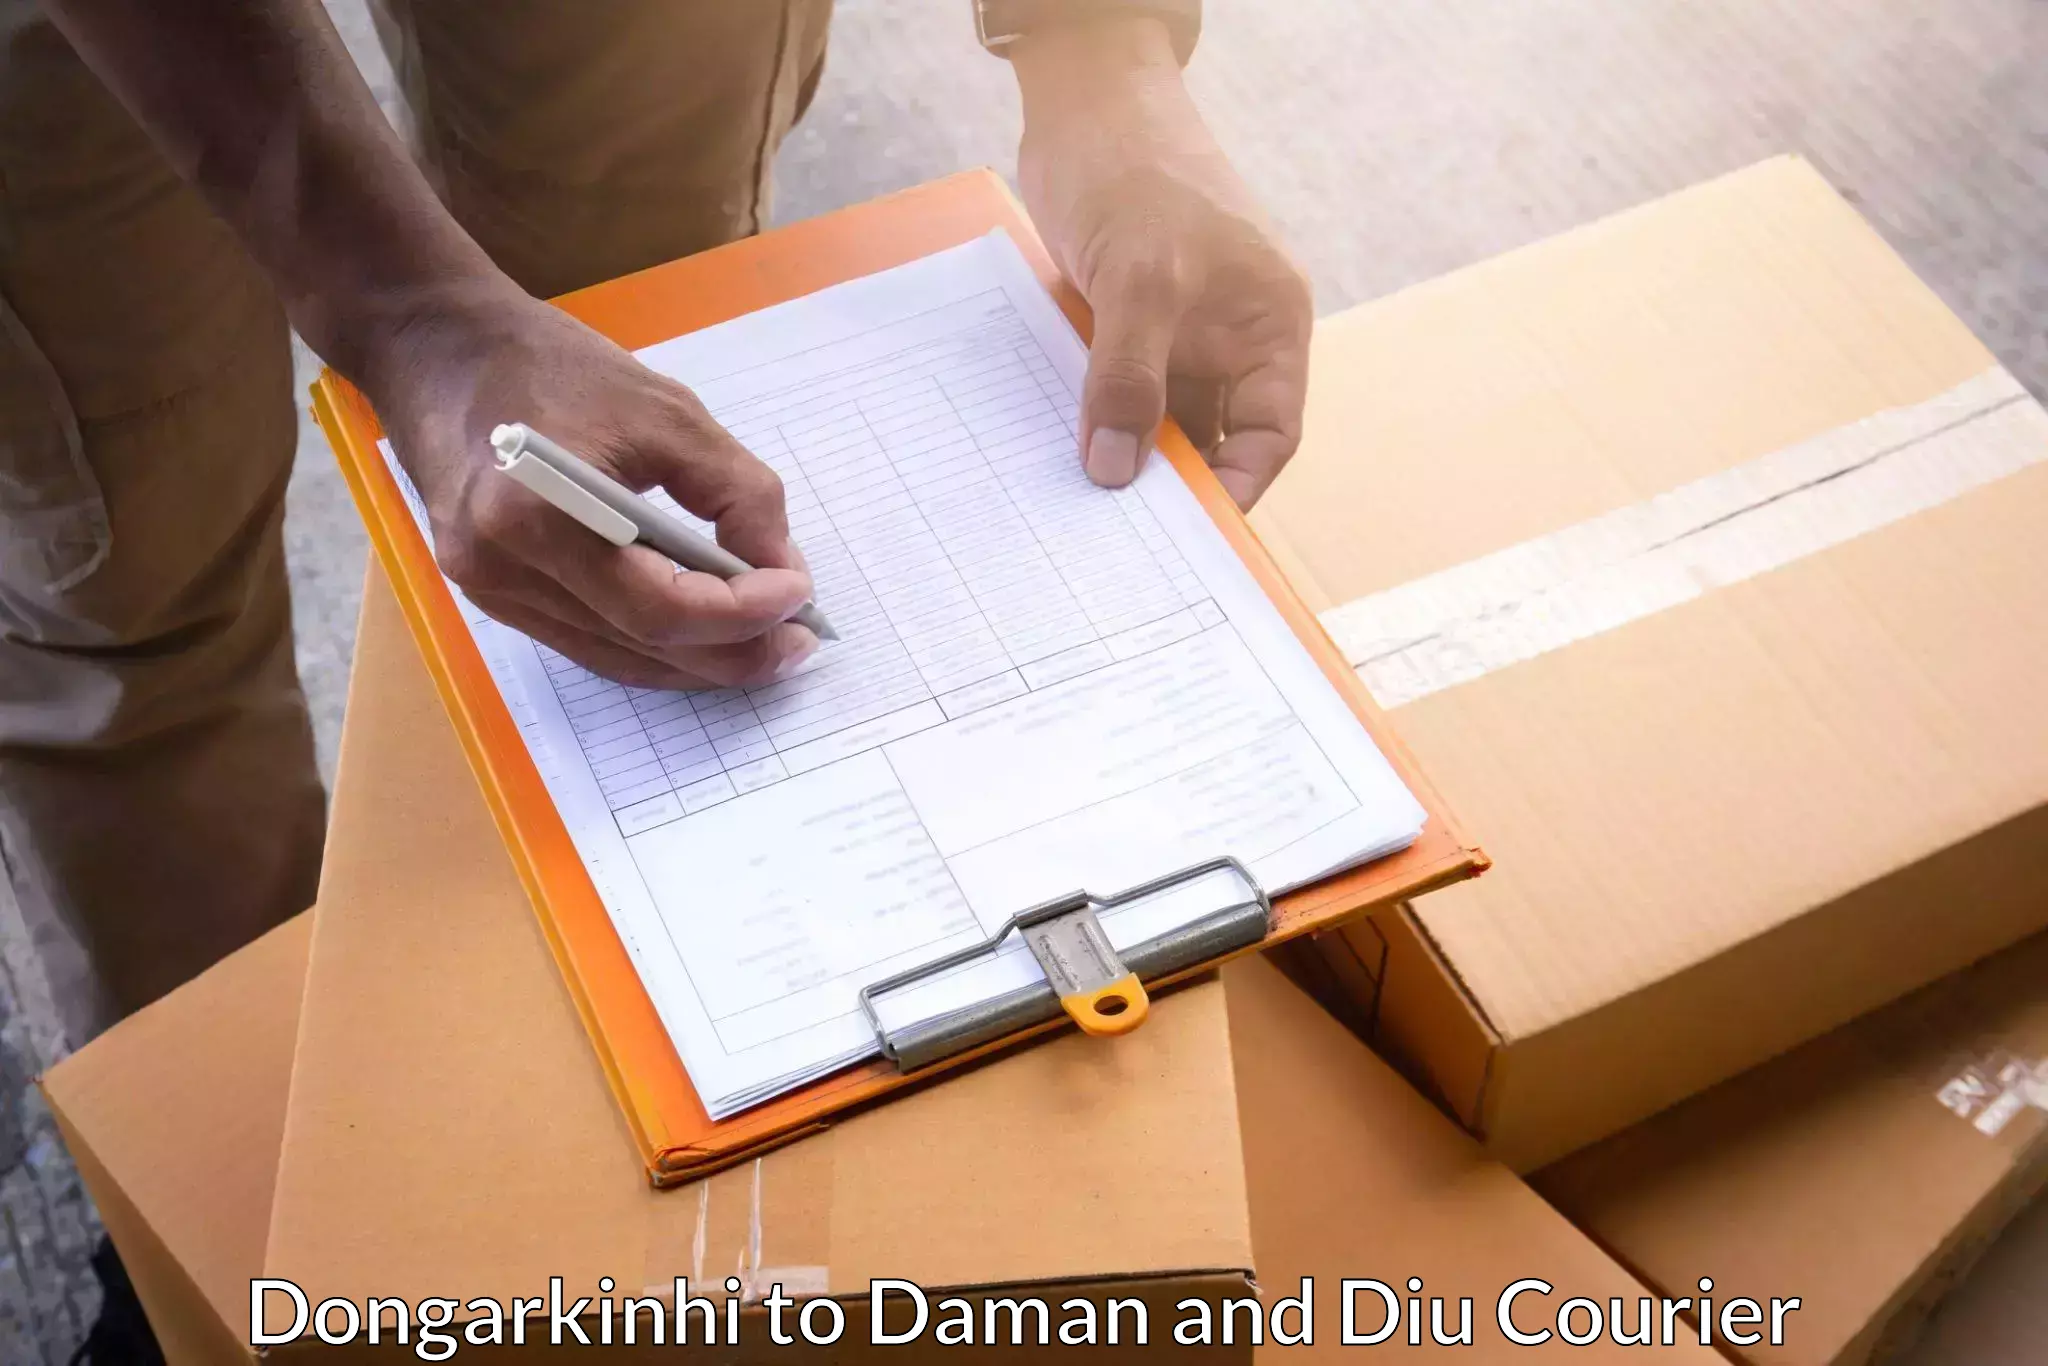 Sustainable courier practices in Dongarkinhi to Daman